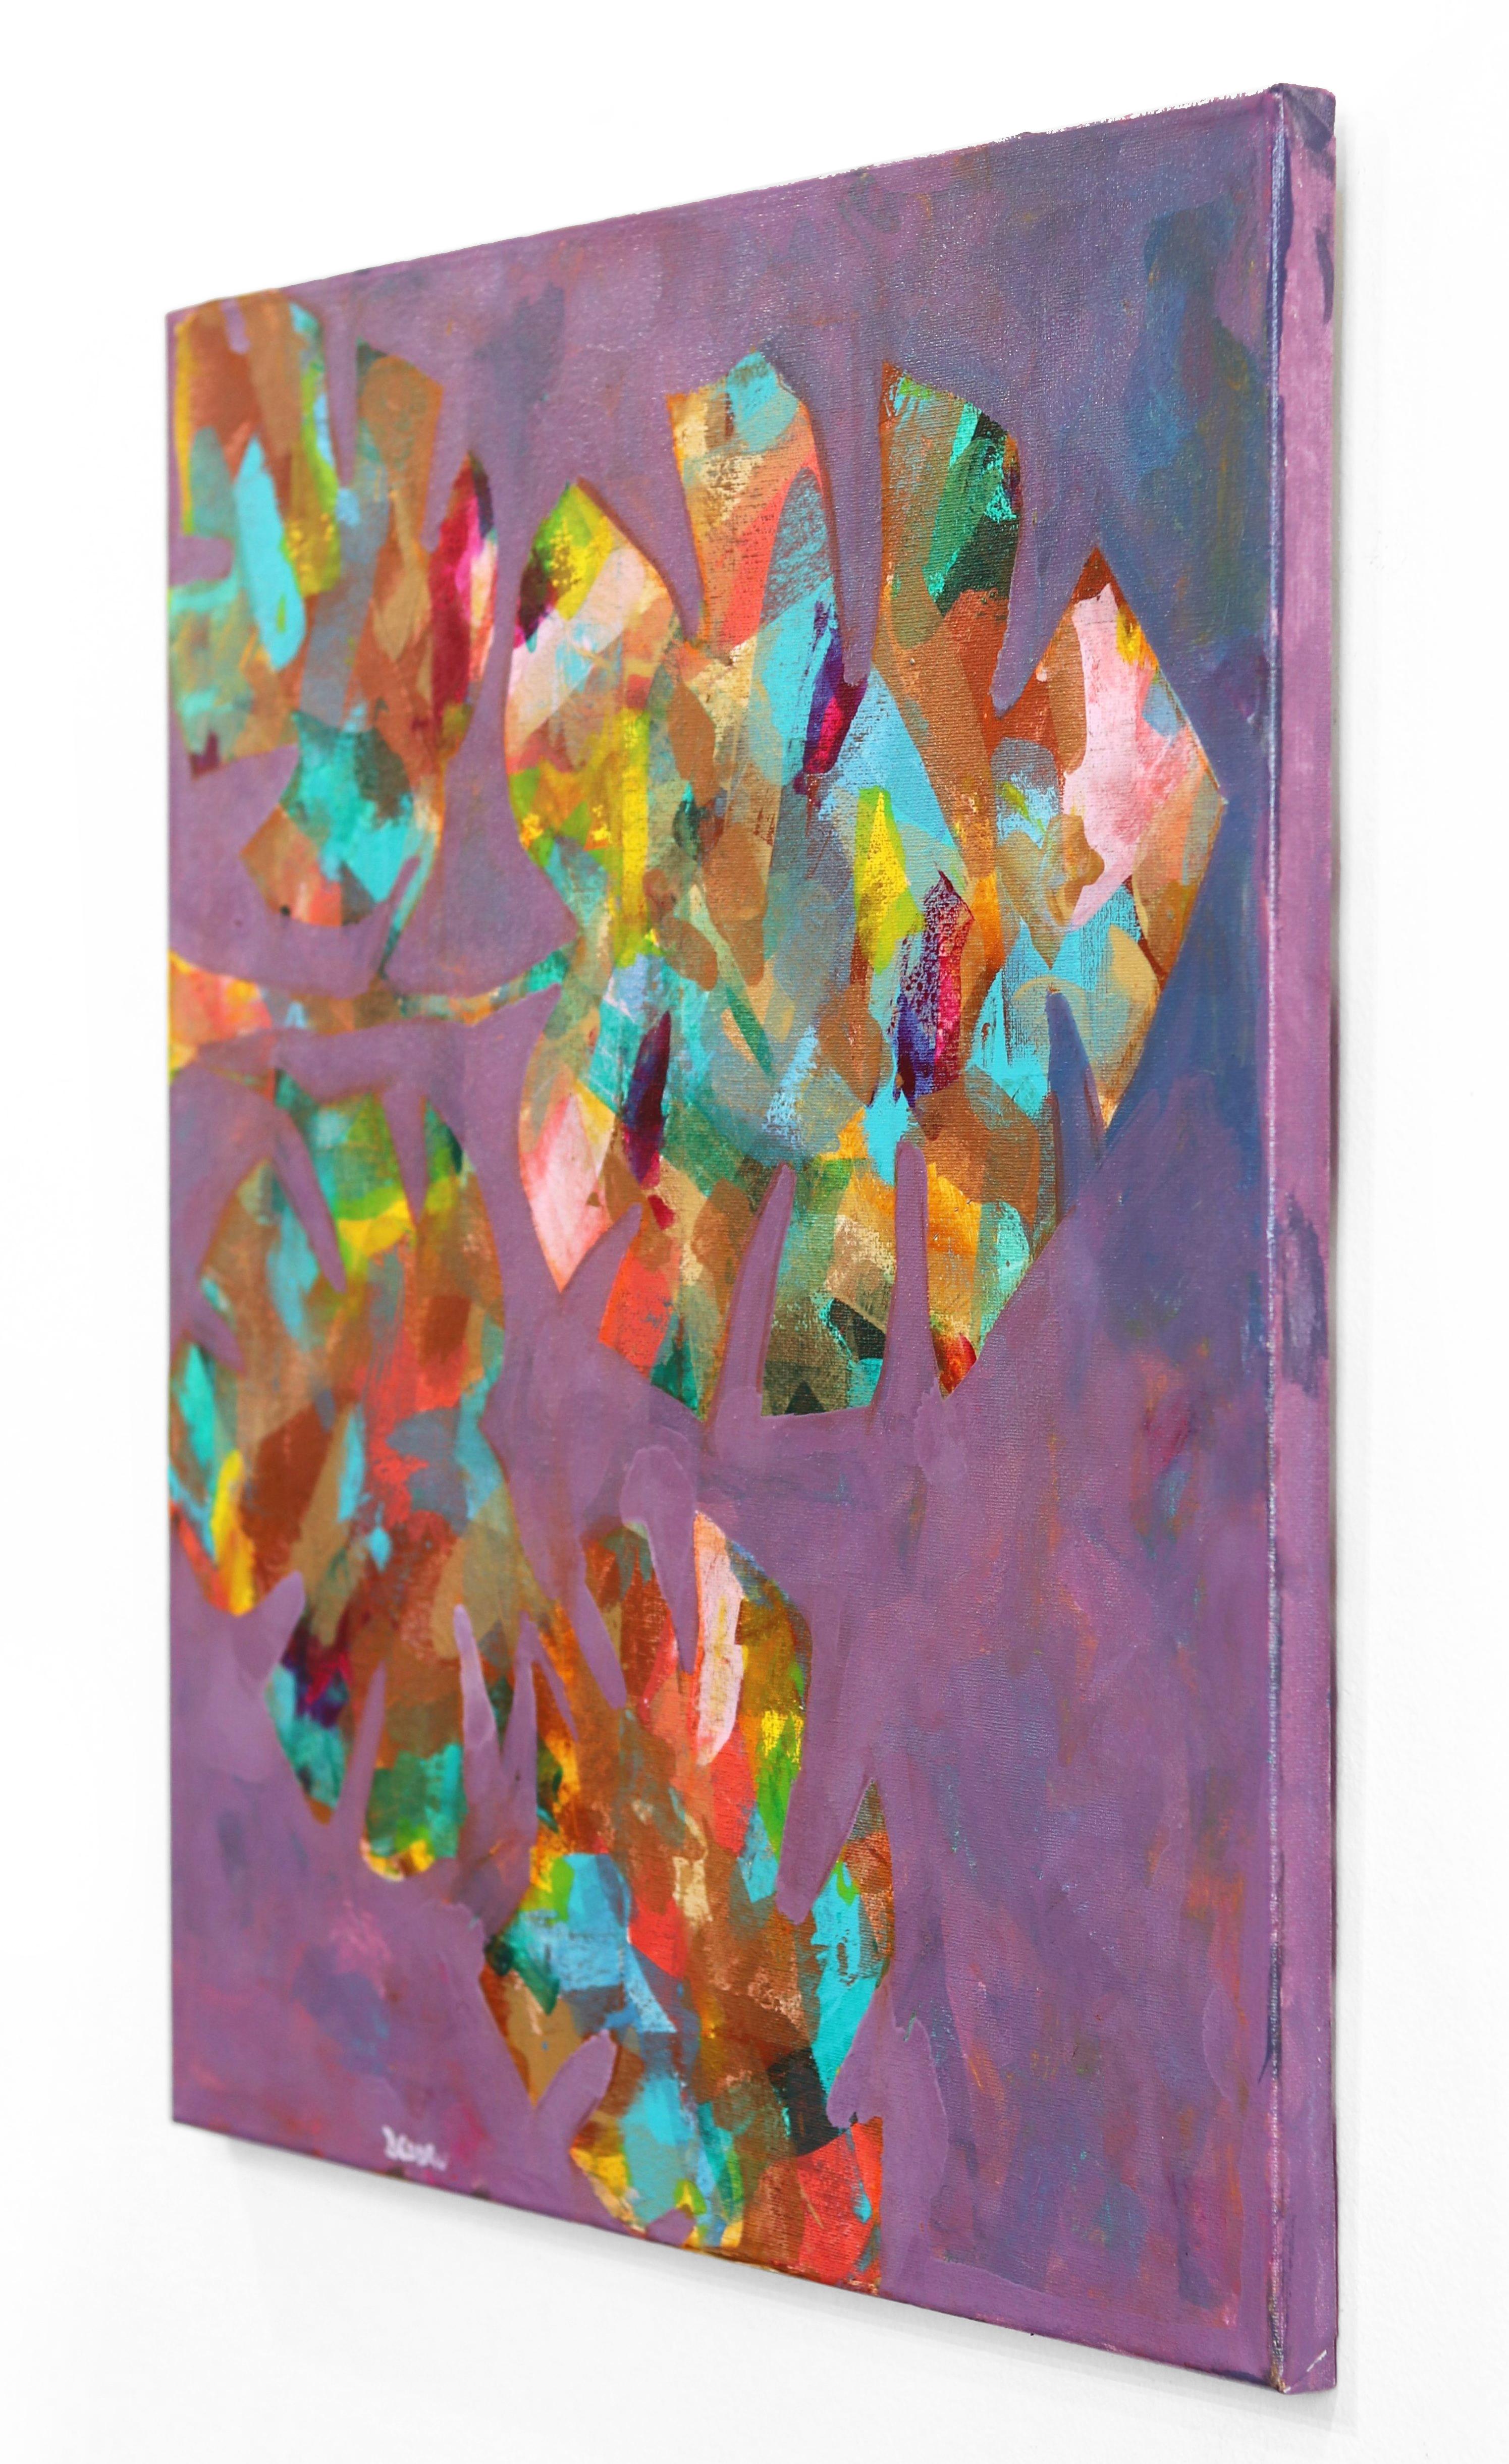 In the realm of vibrant expressions, Italian artist Giuseppe Beddru masterfully brings to life abstracted flora in a spectacular fusion of color and form. The canvas dances with an orchestra of hues, where vivid leaves unfurl their chromatic